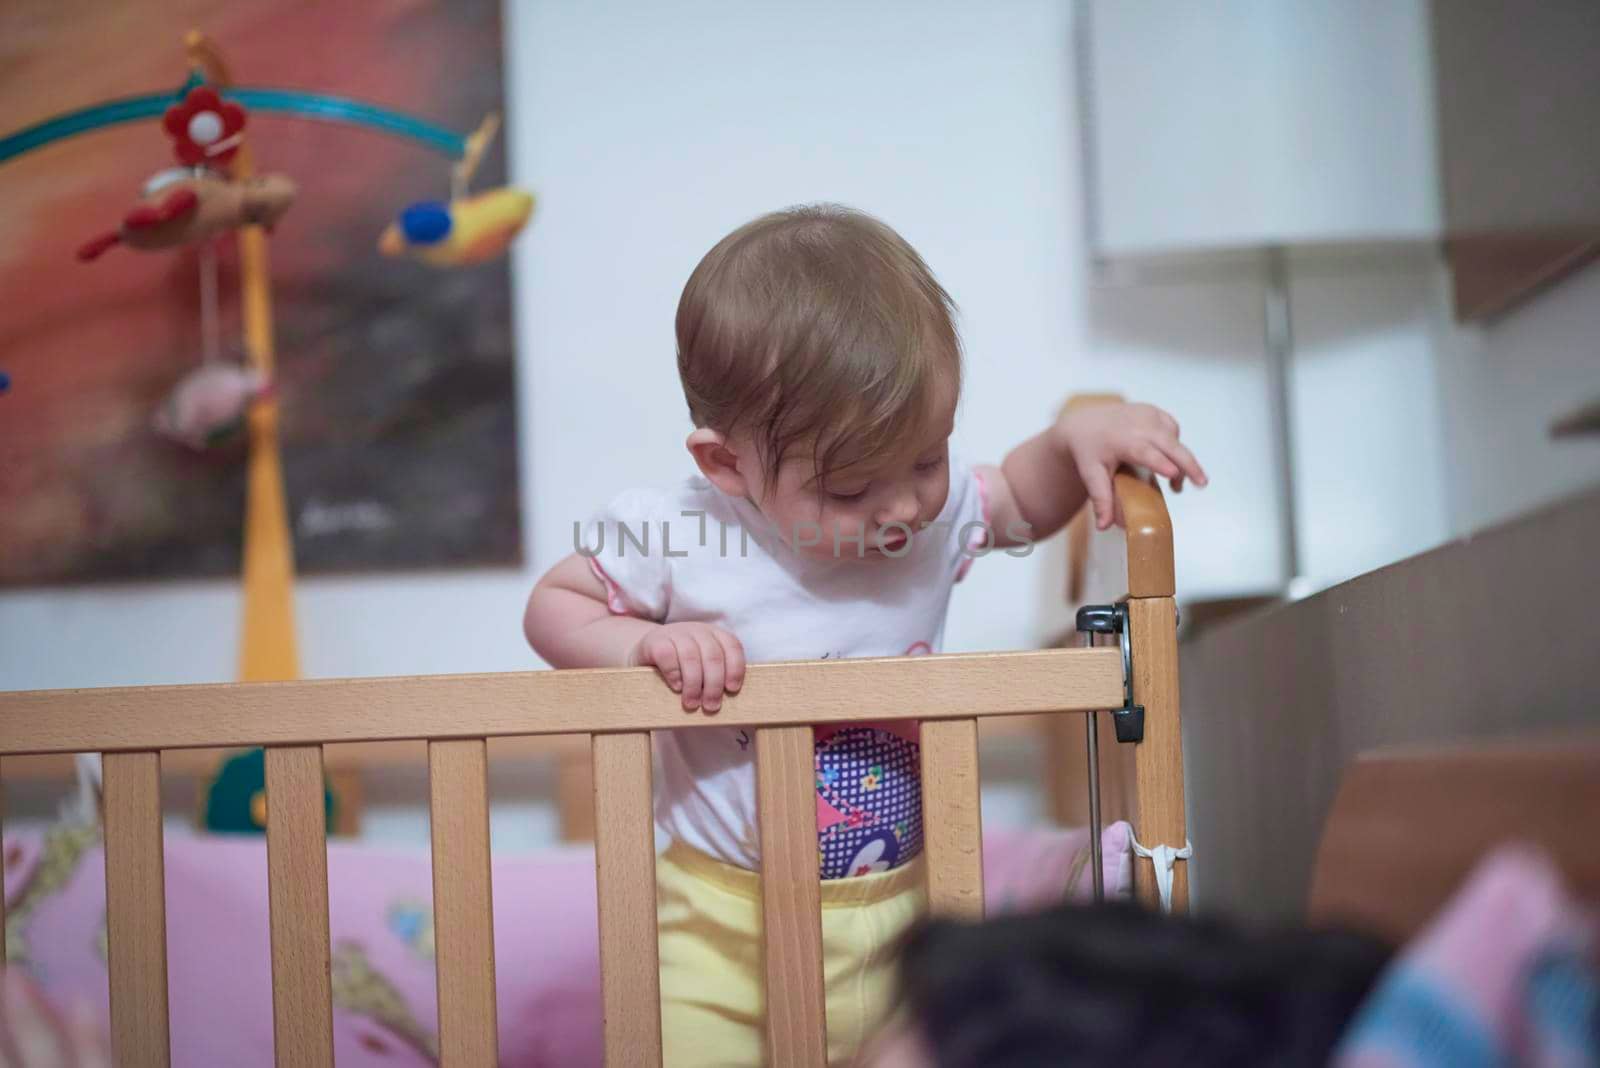 cute  little one year old baby and making first steps in bed by dotshock